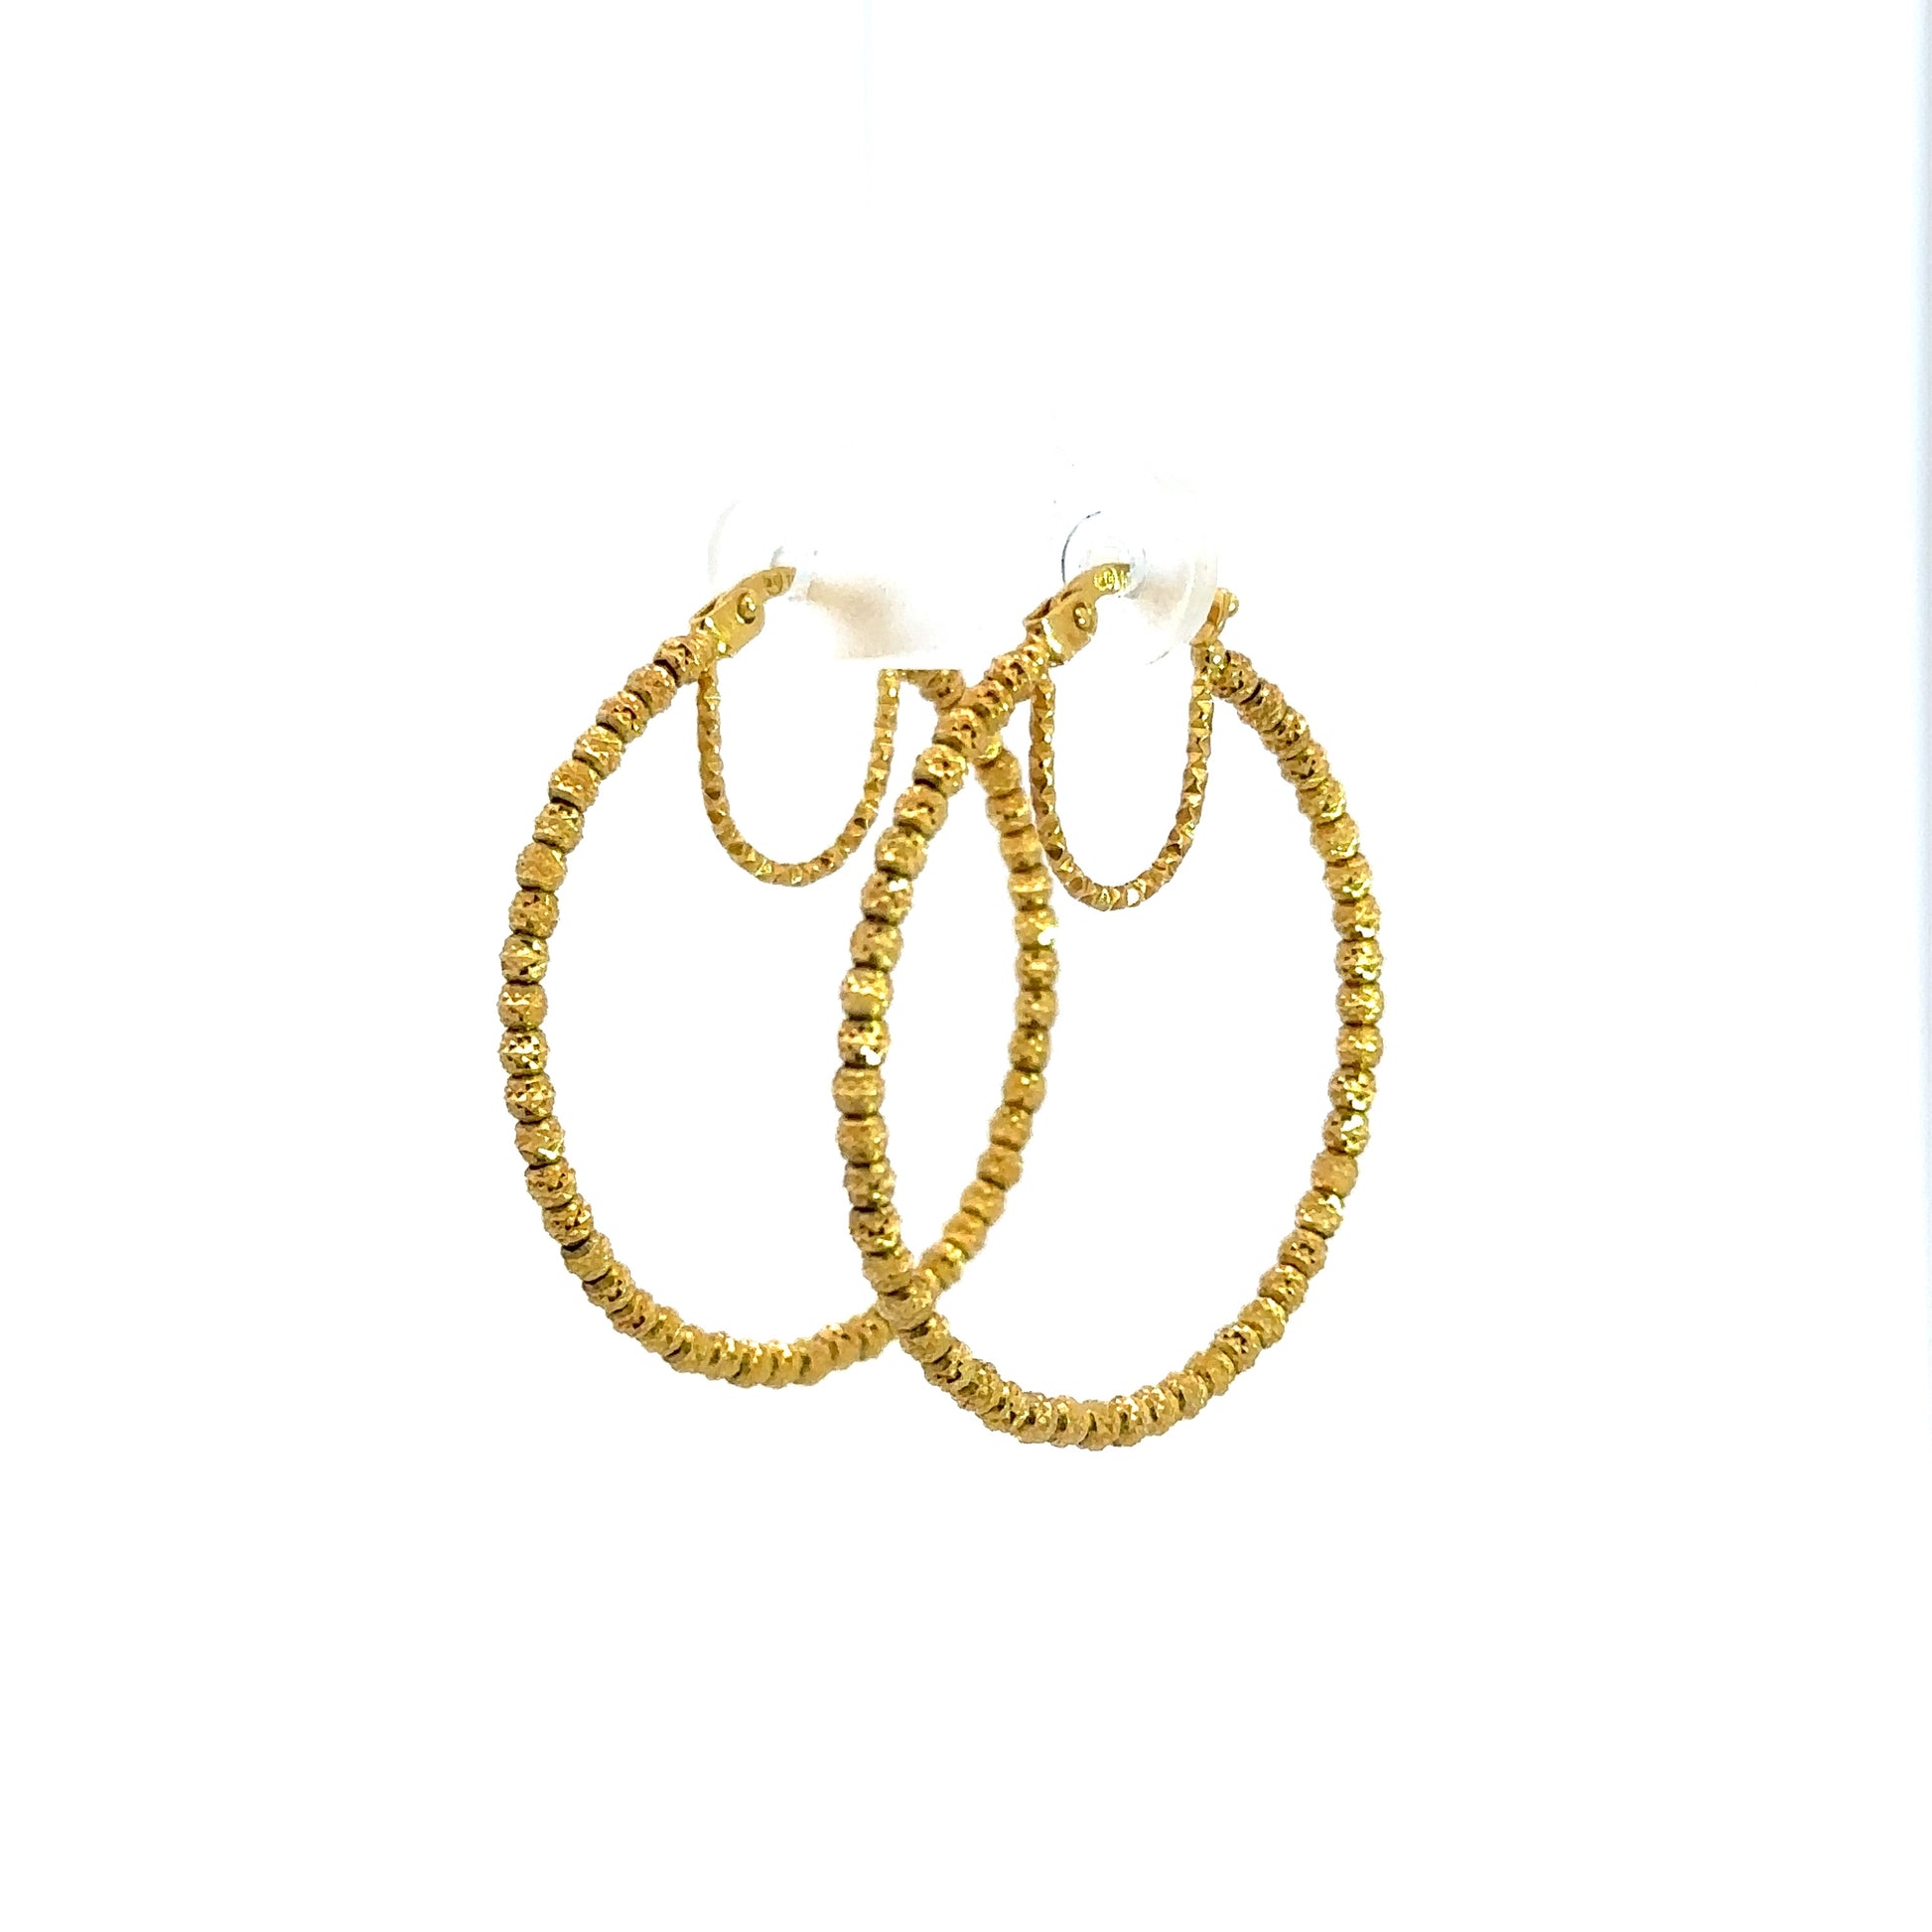 diagonal view of yellow gold hoops